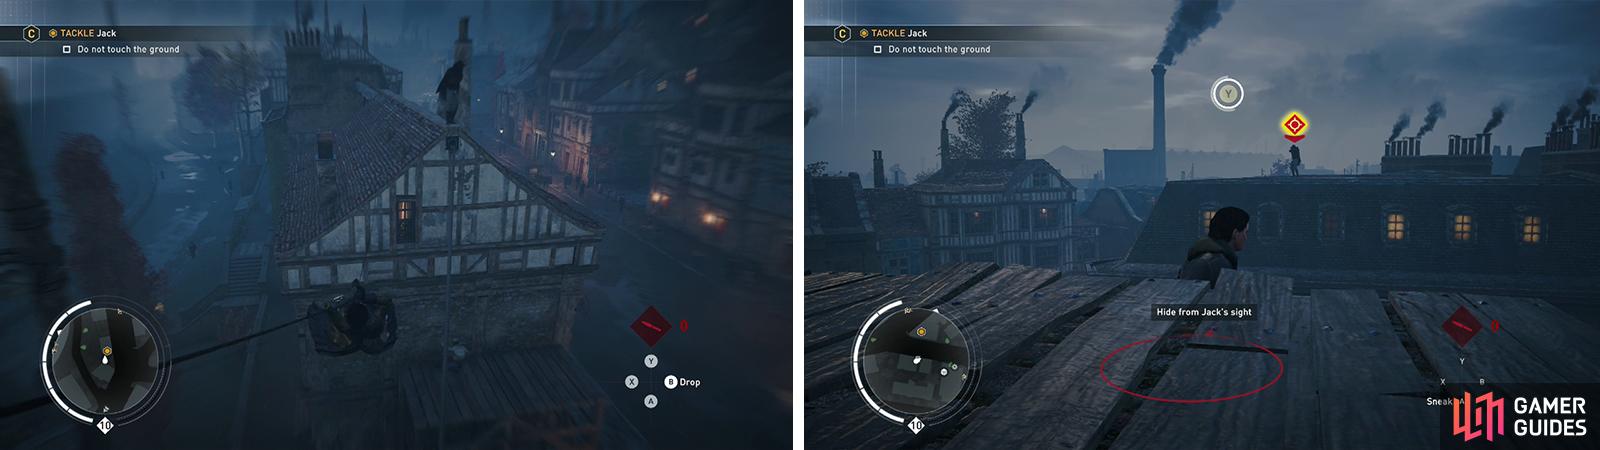 Use the Rope Launcher to stay off the ground (left). When you see the button prompt appear, dodge the incoming fire (right).